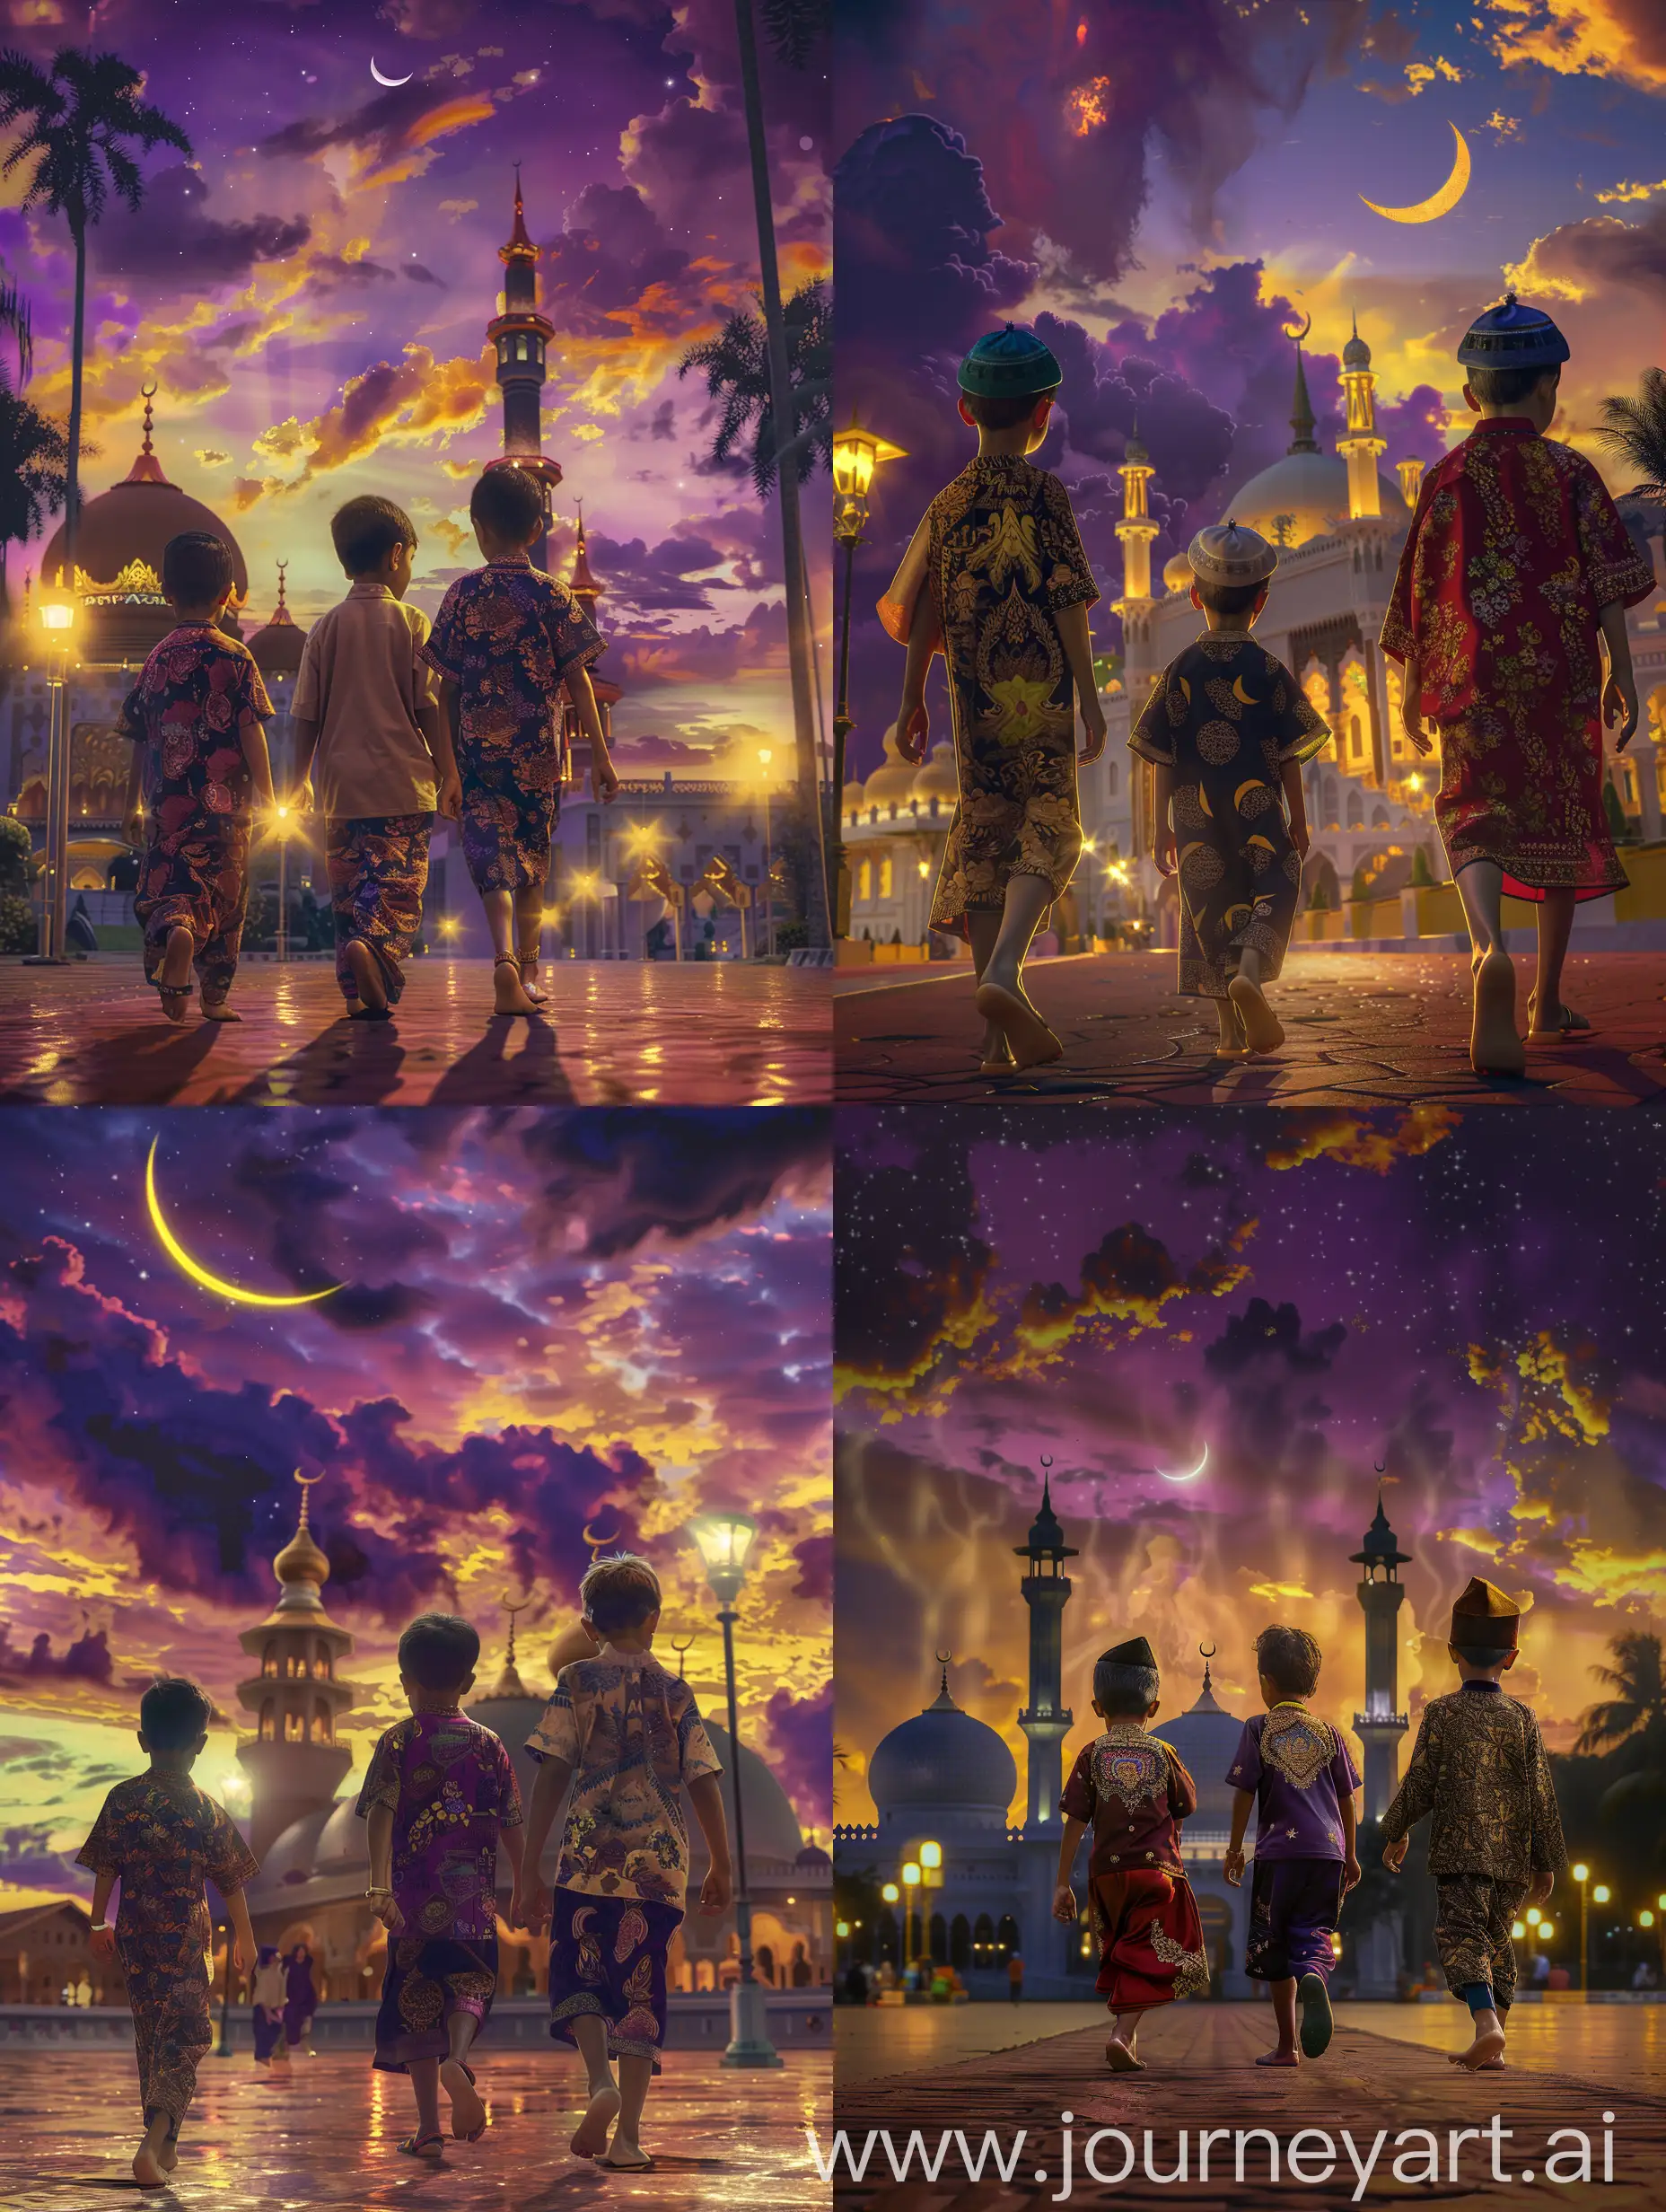 ultra realistic, three young Malaysian boys wearing songkok and malay clothes walking towards the mosque. The atmosphere is night and the sky has purple and yellow clouds. there is a crescent moon. the mosque is illuminated by lamplight. canon eos-id x mark iii dslr --v 6.0